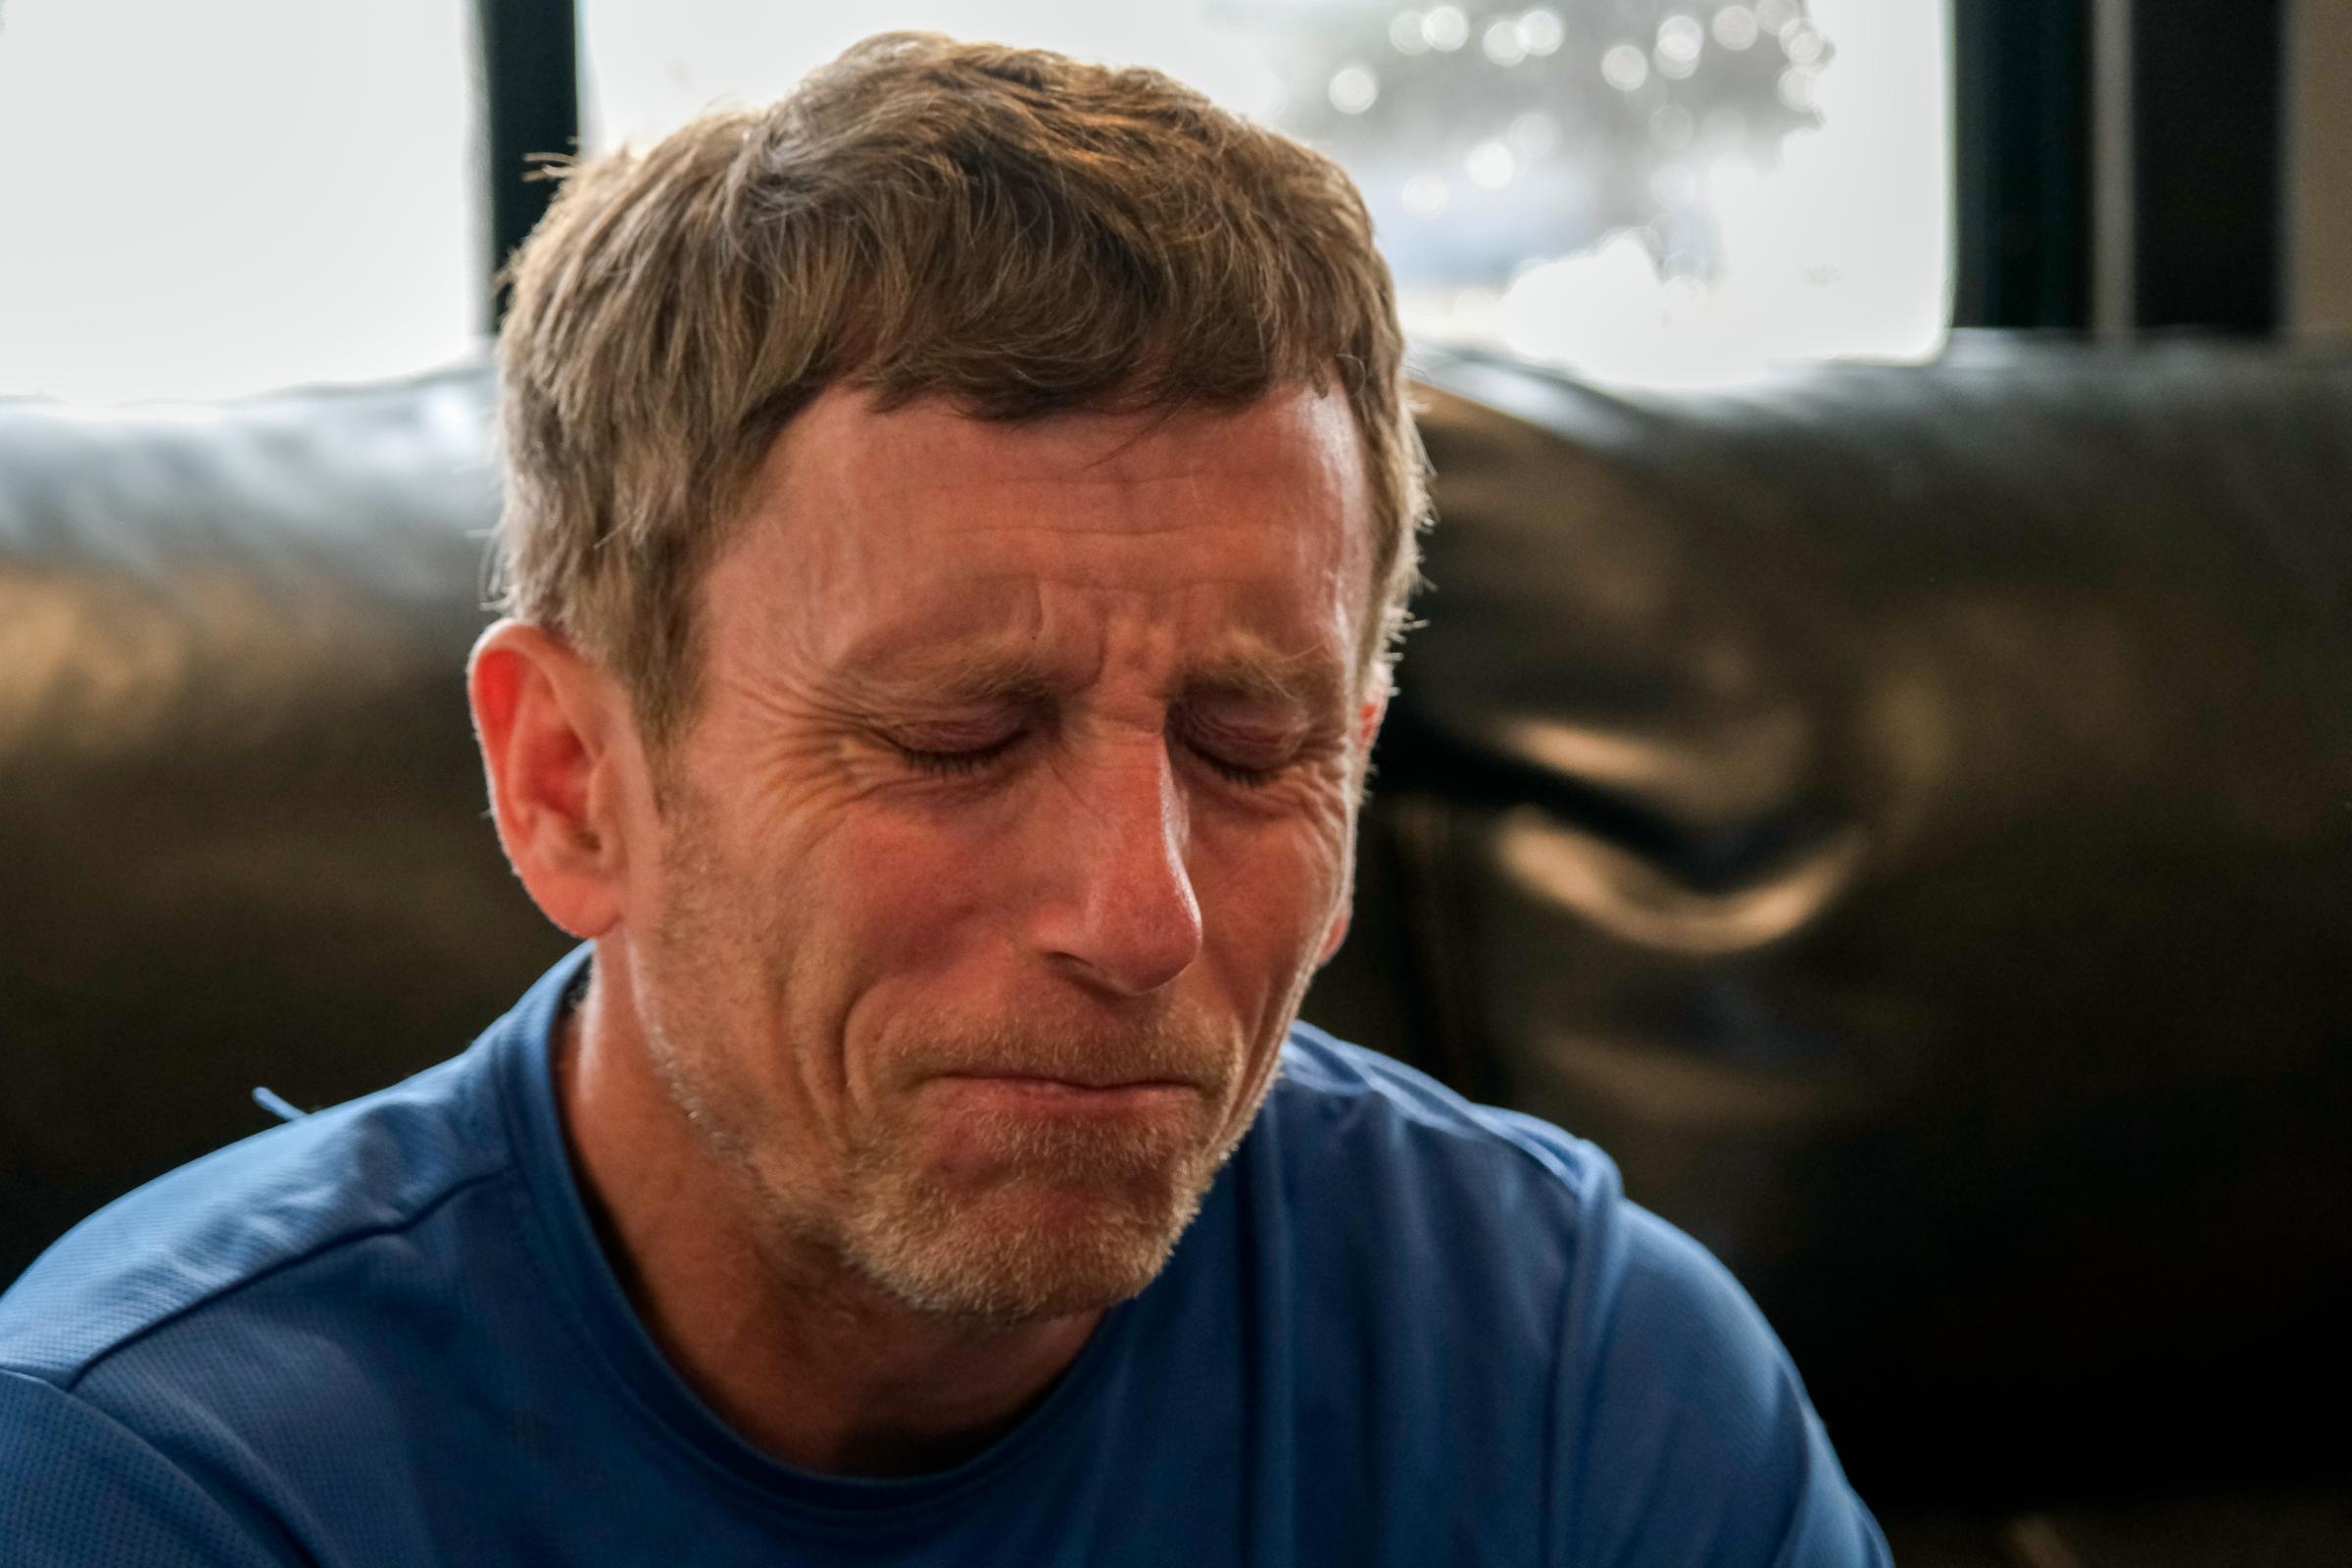 Floyd Bledsoe gets emotional recalling his broken relationships and his inability to always be emotionally present due to this time in prison, at his home in Hutchinson, Kansas, USA on January 15, 2022. Assignment code 20220115InnocentMan Hutchinson USA